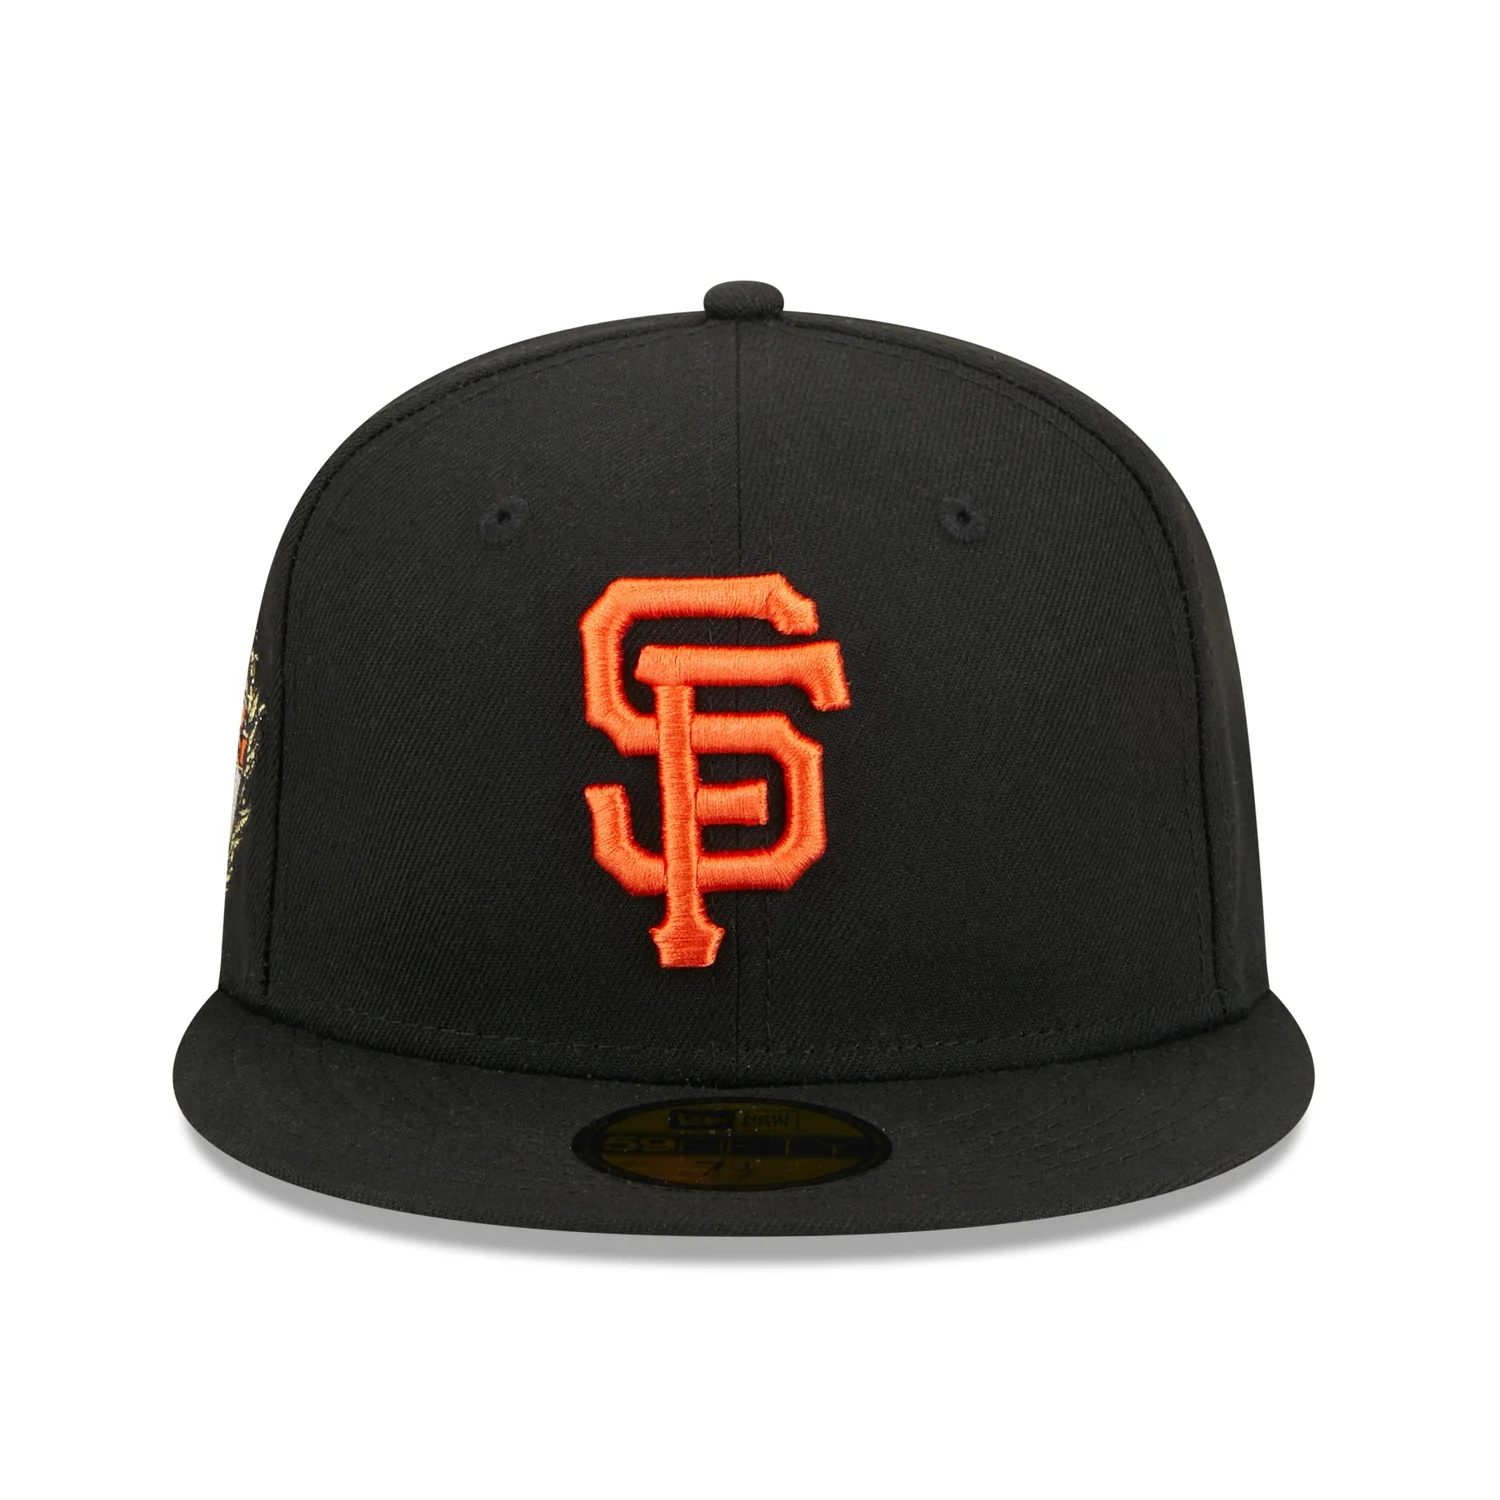 New Era San Francisco Giants Laurel All Star Game 1984 Side Patch 59fifty Fitted Cap-Black